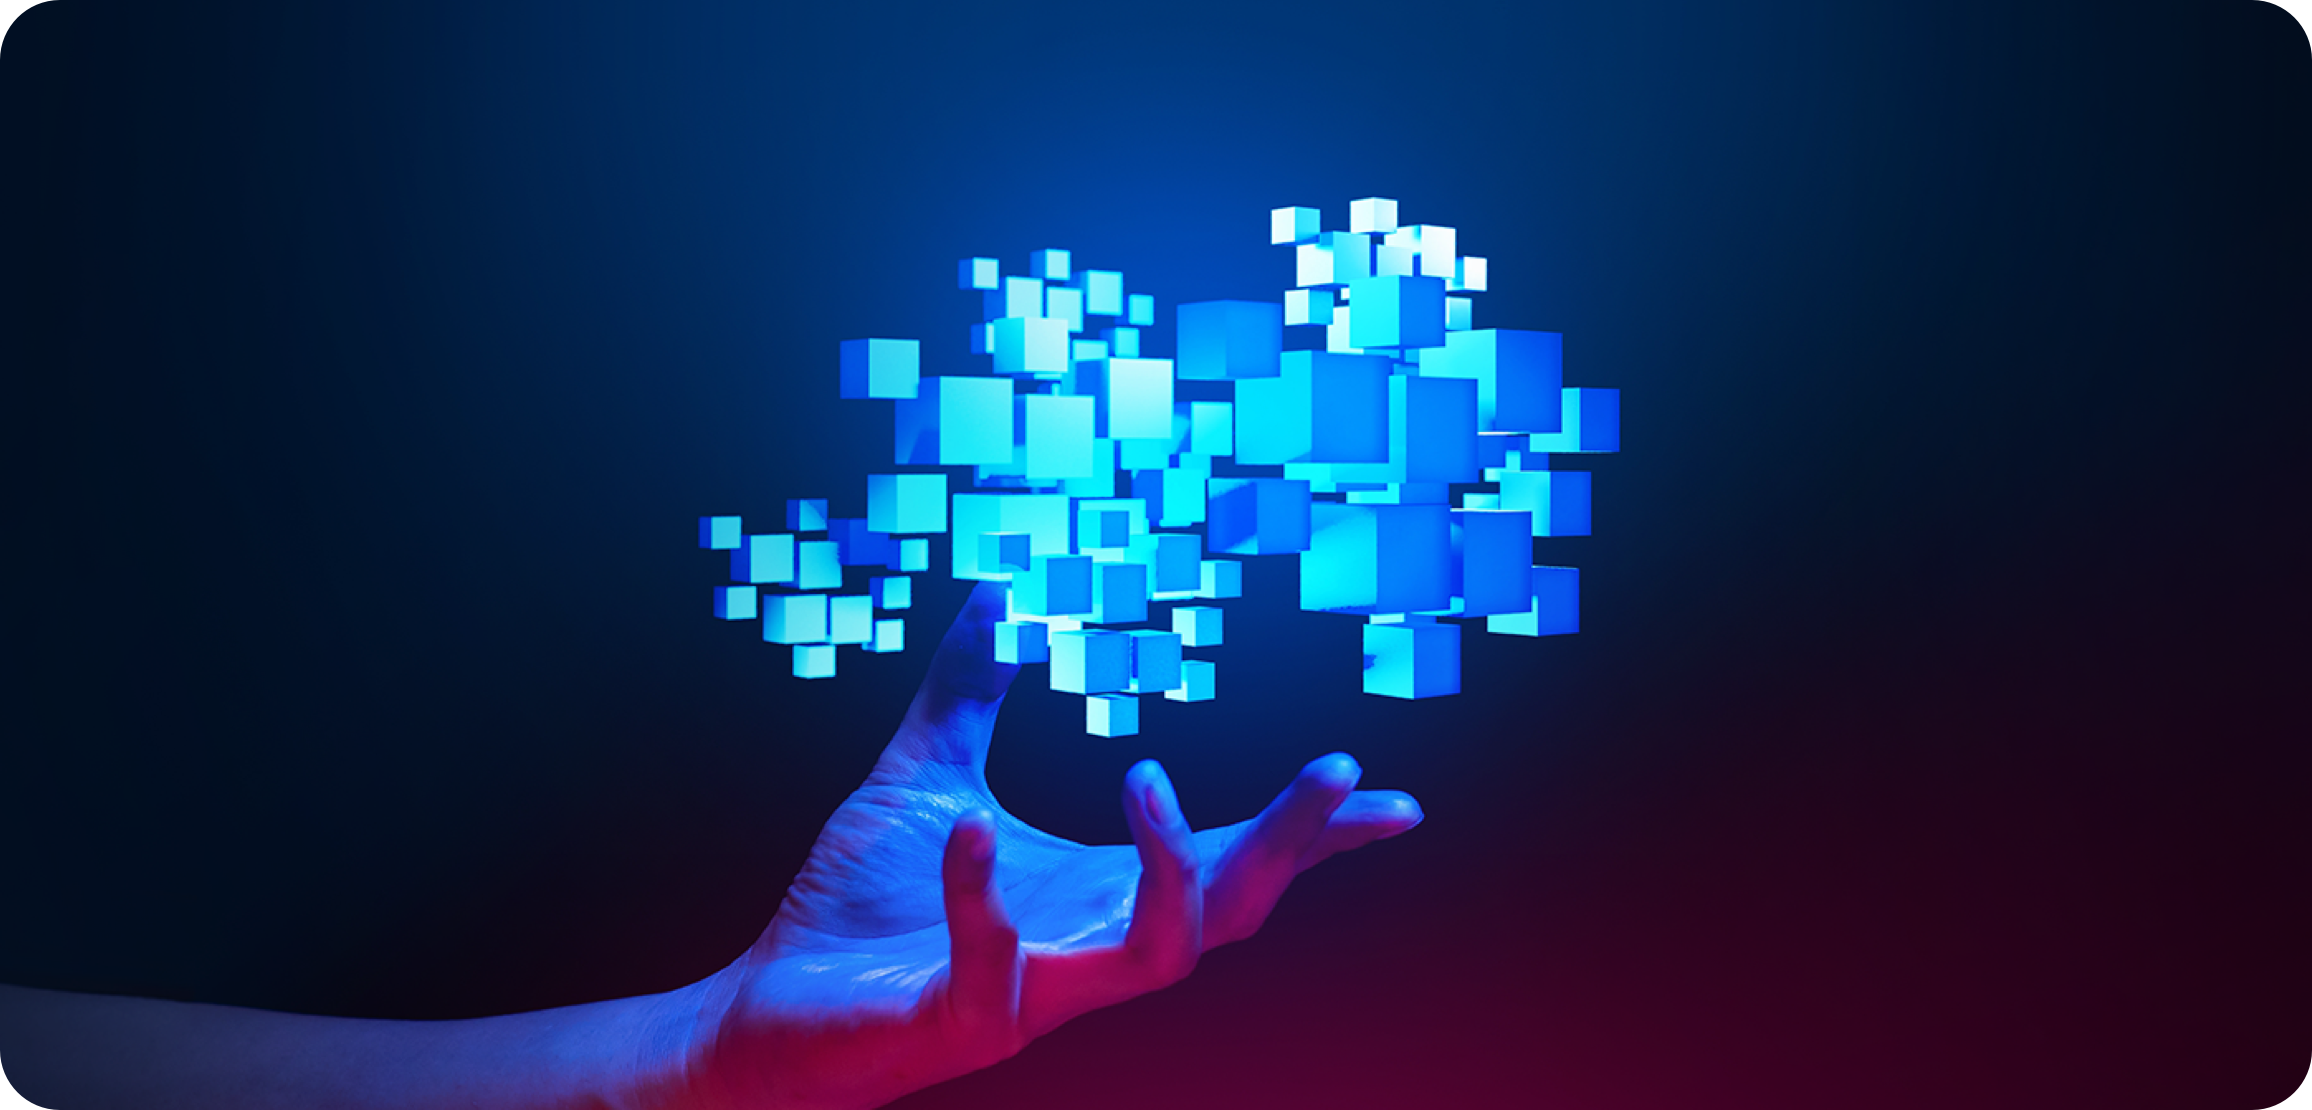 An illustration image of a blue cube-shaped graphic on an outstretched palm.